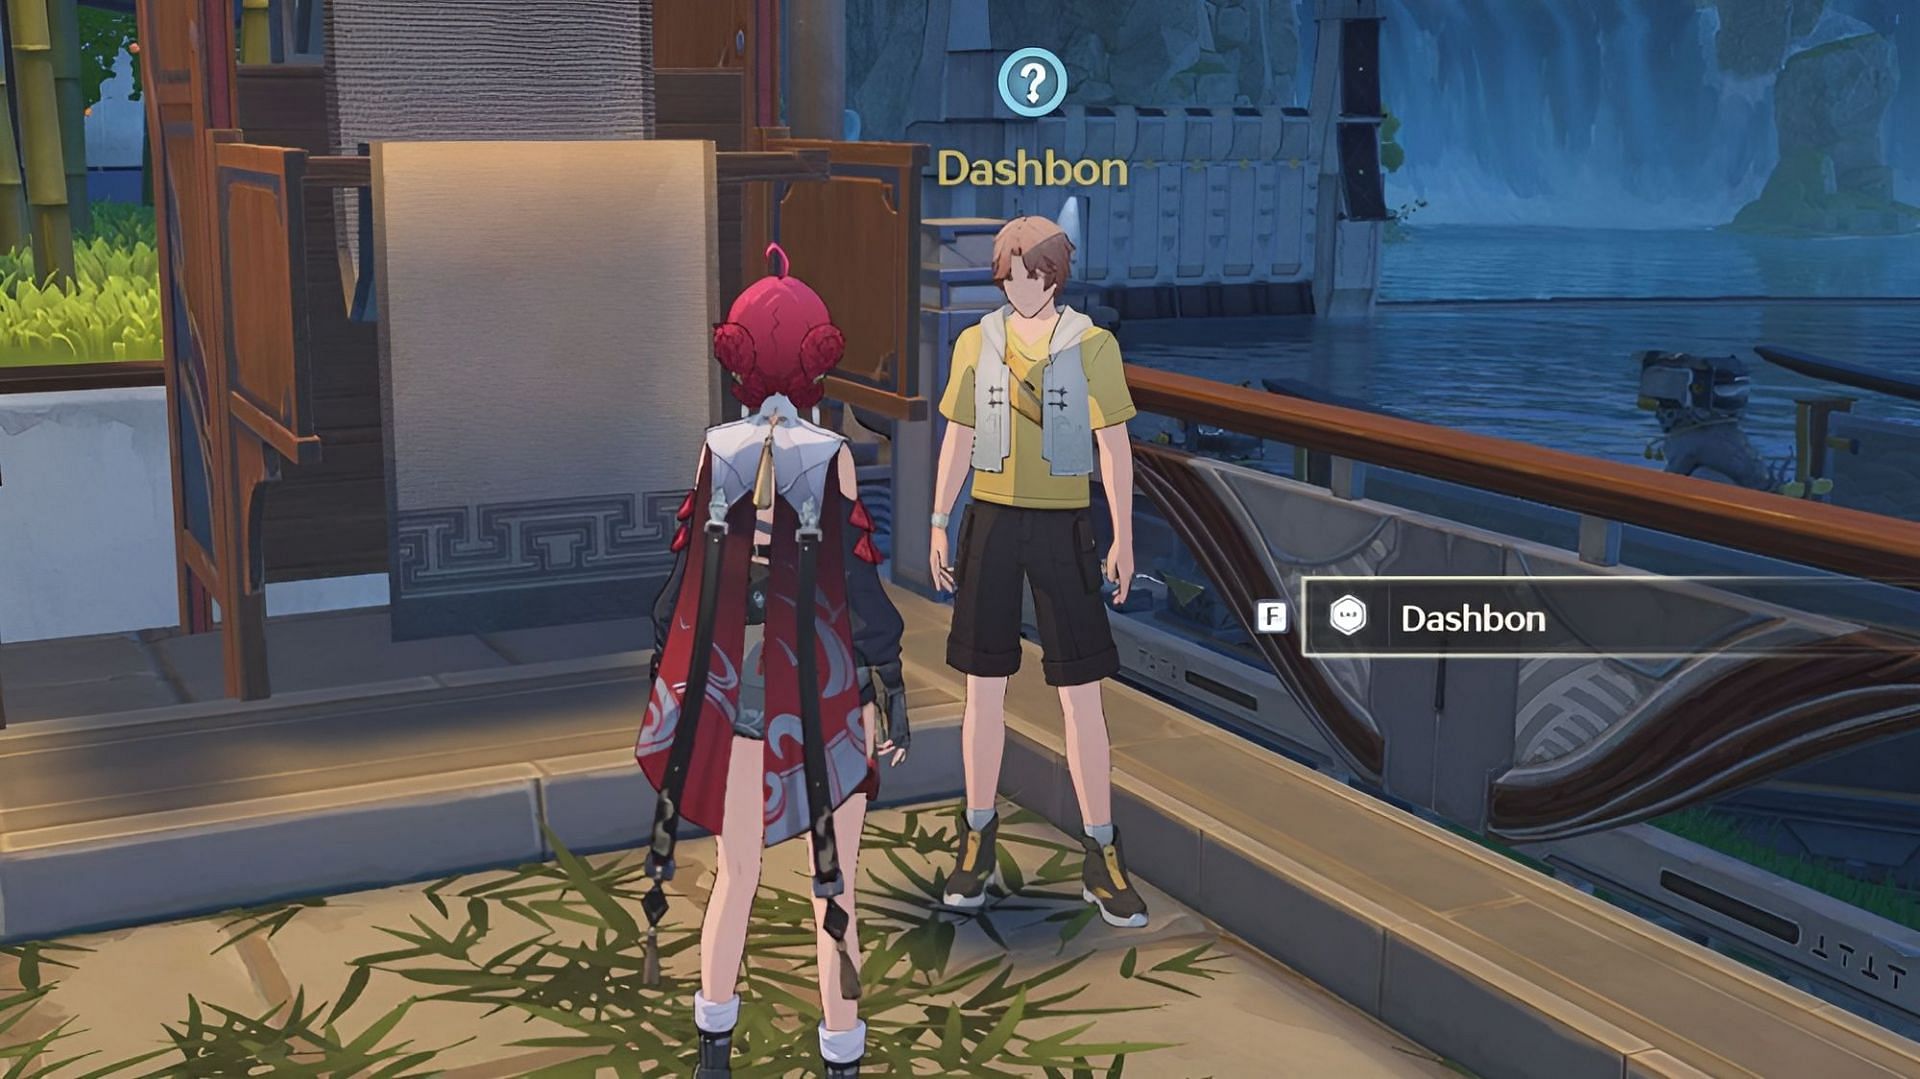 Image showing Danjin in front of Dashbon